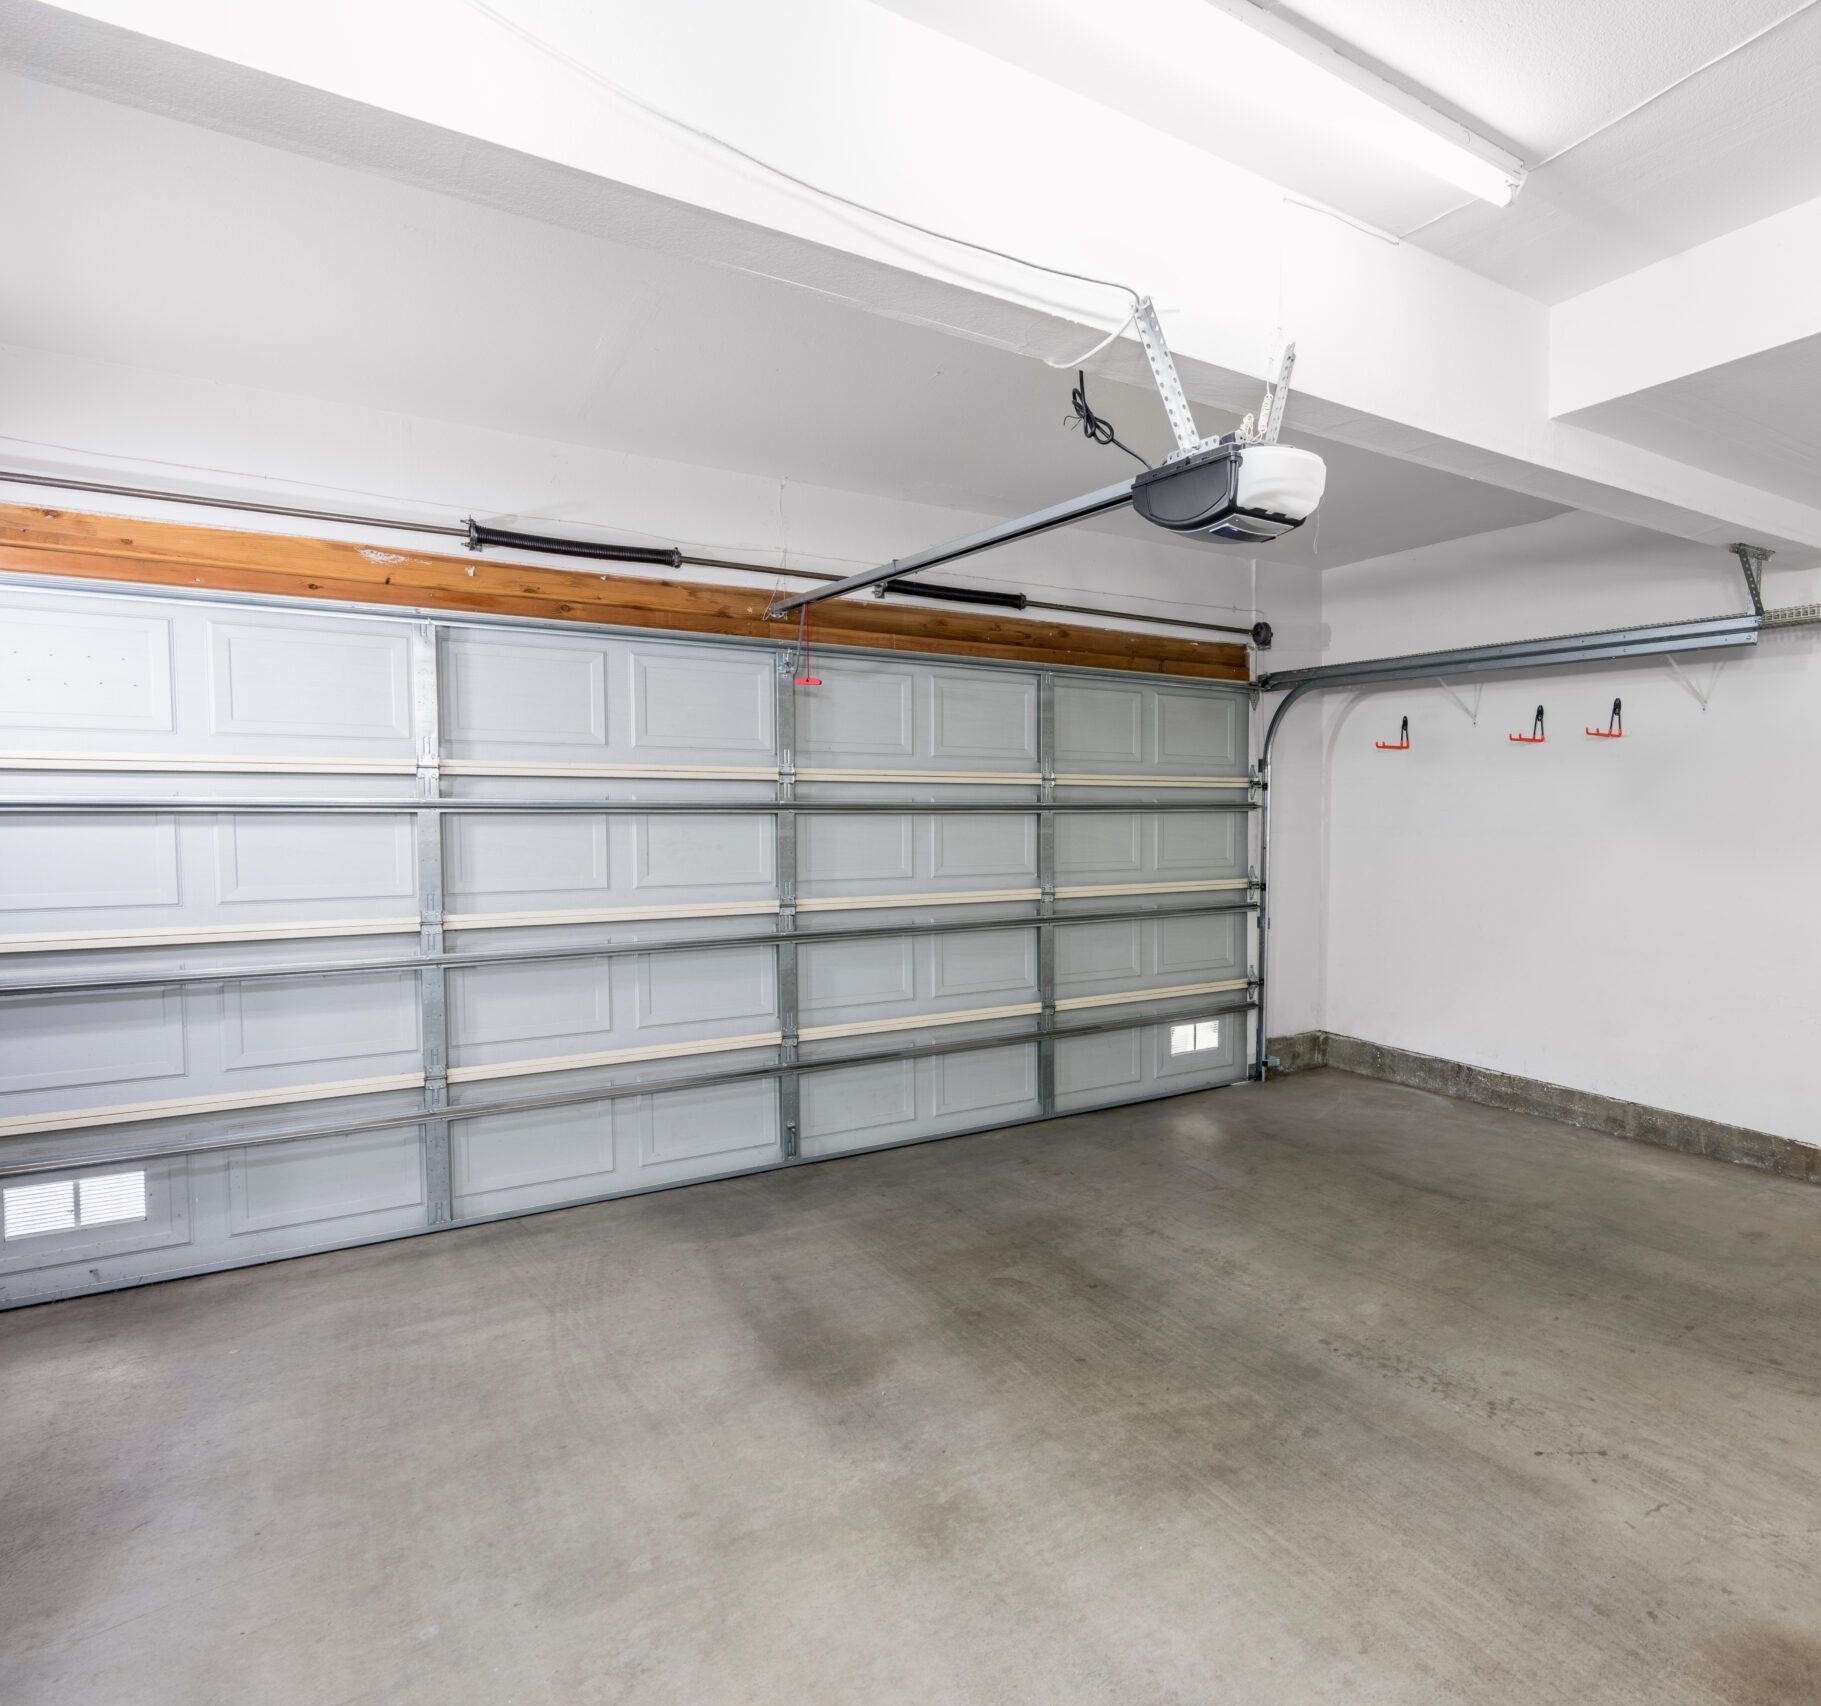 Affordable Garage Door Fix is proud to provide fast & affordable garage door repair in Kearns, Utah. Contact Us for a quote